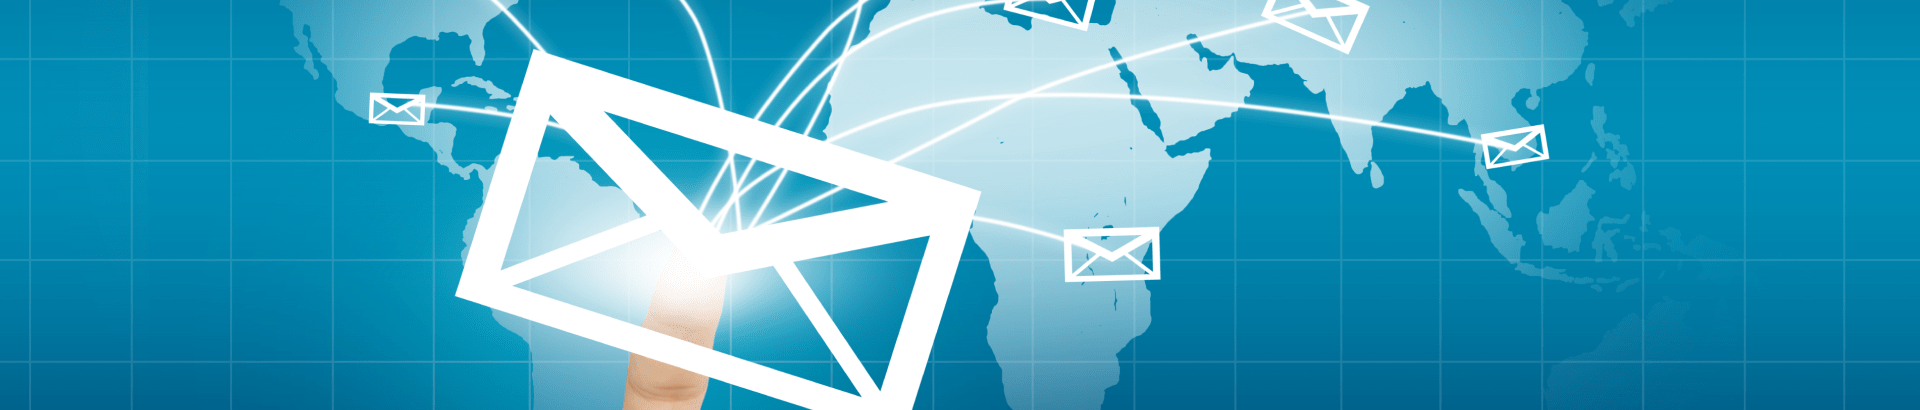 What Are The Differences Between SMS And Email Marketing?